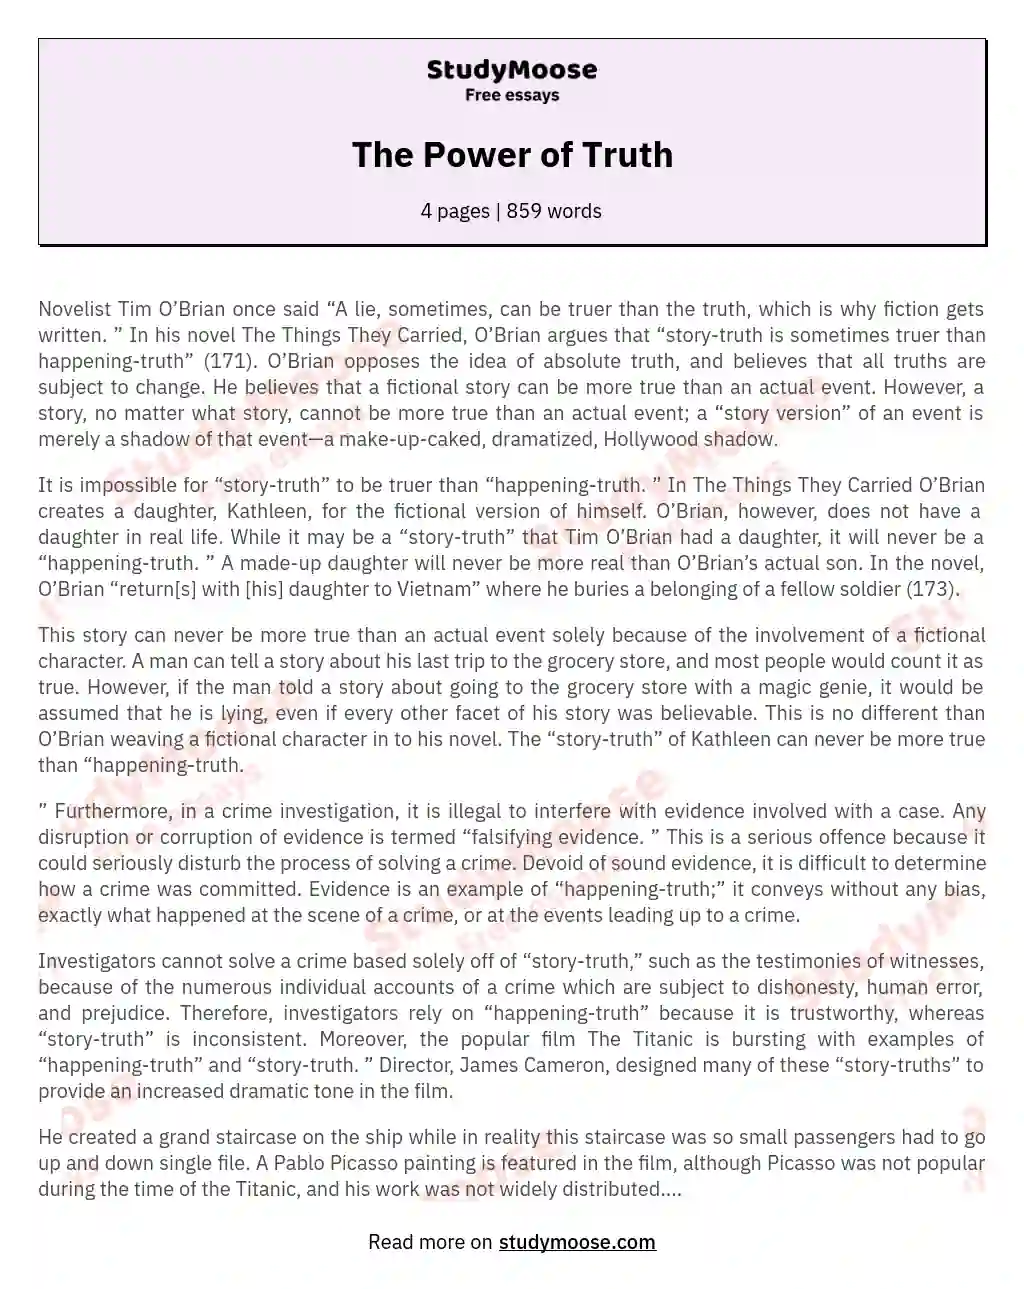 The Power of Truth essay